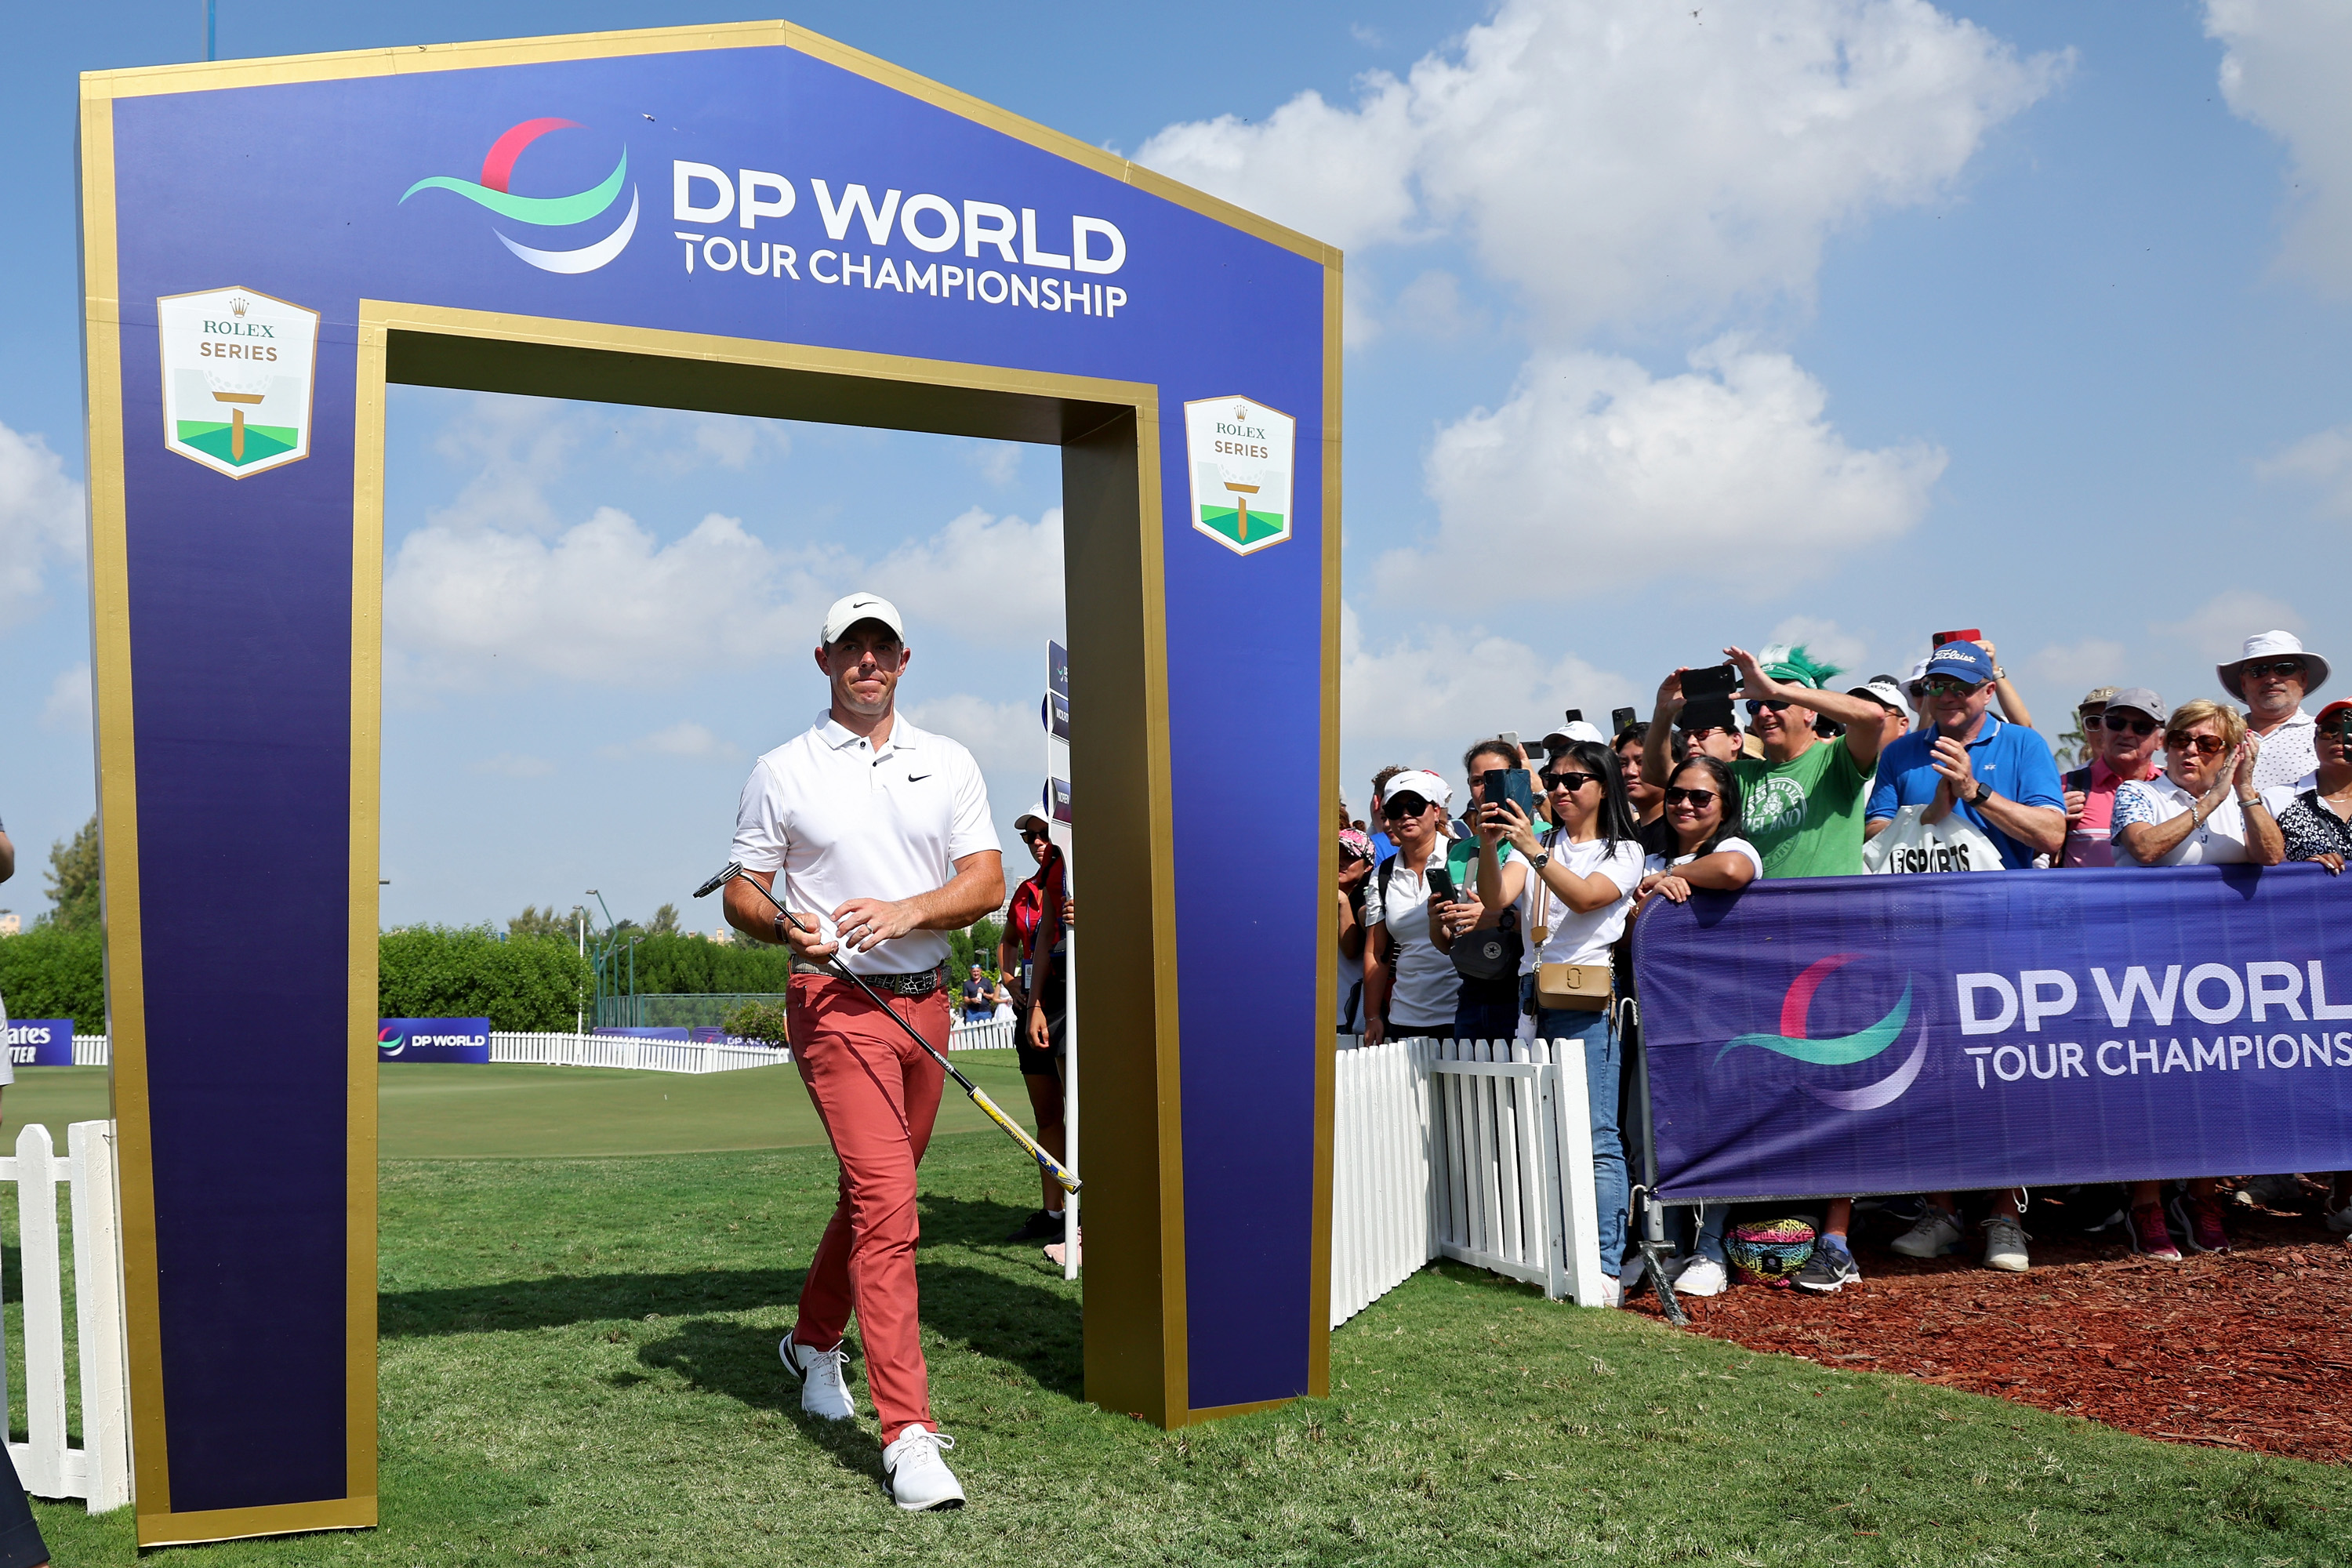 The Slam: Recapping a wild few days in the world of golf